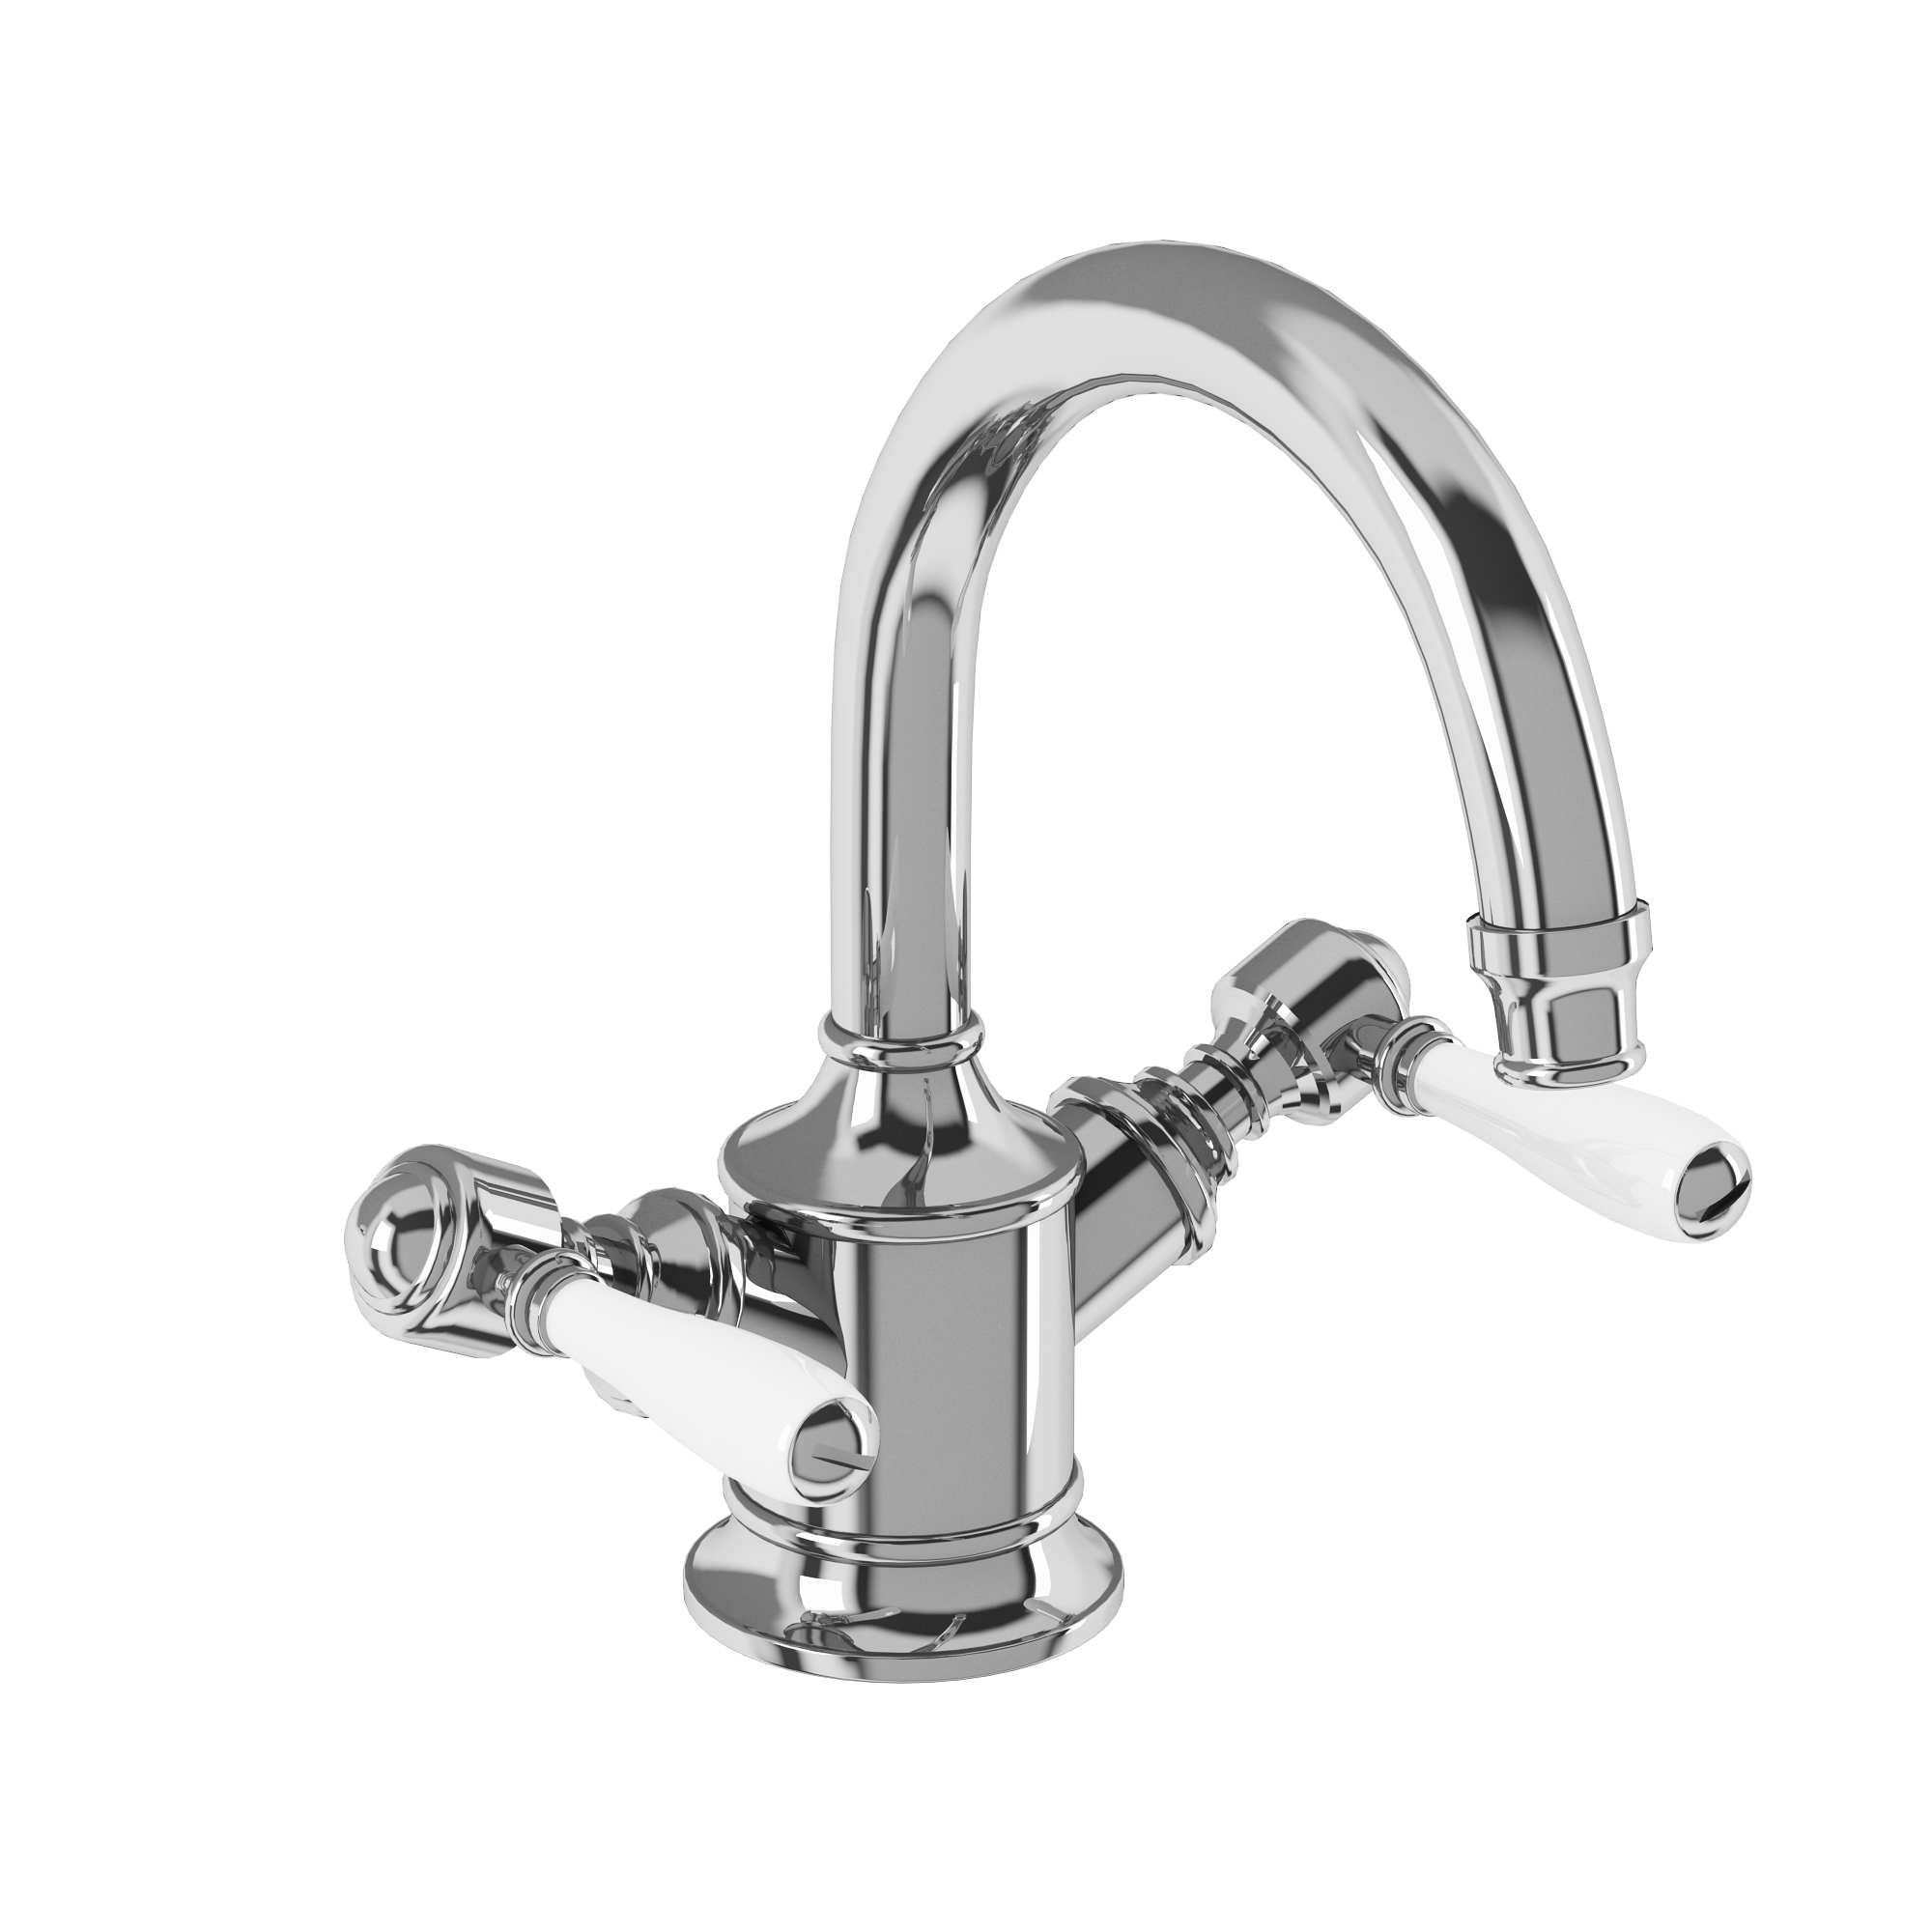 Arcade Dual-lever basin mixer without pop up waste - chrome - with ceramic lever